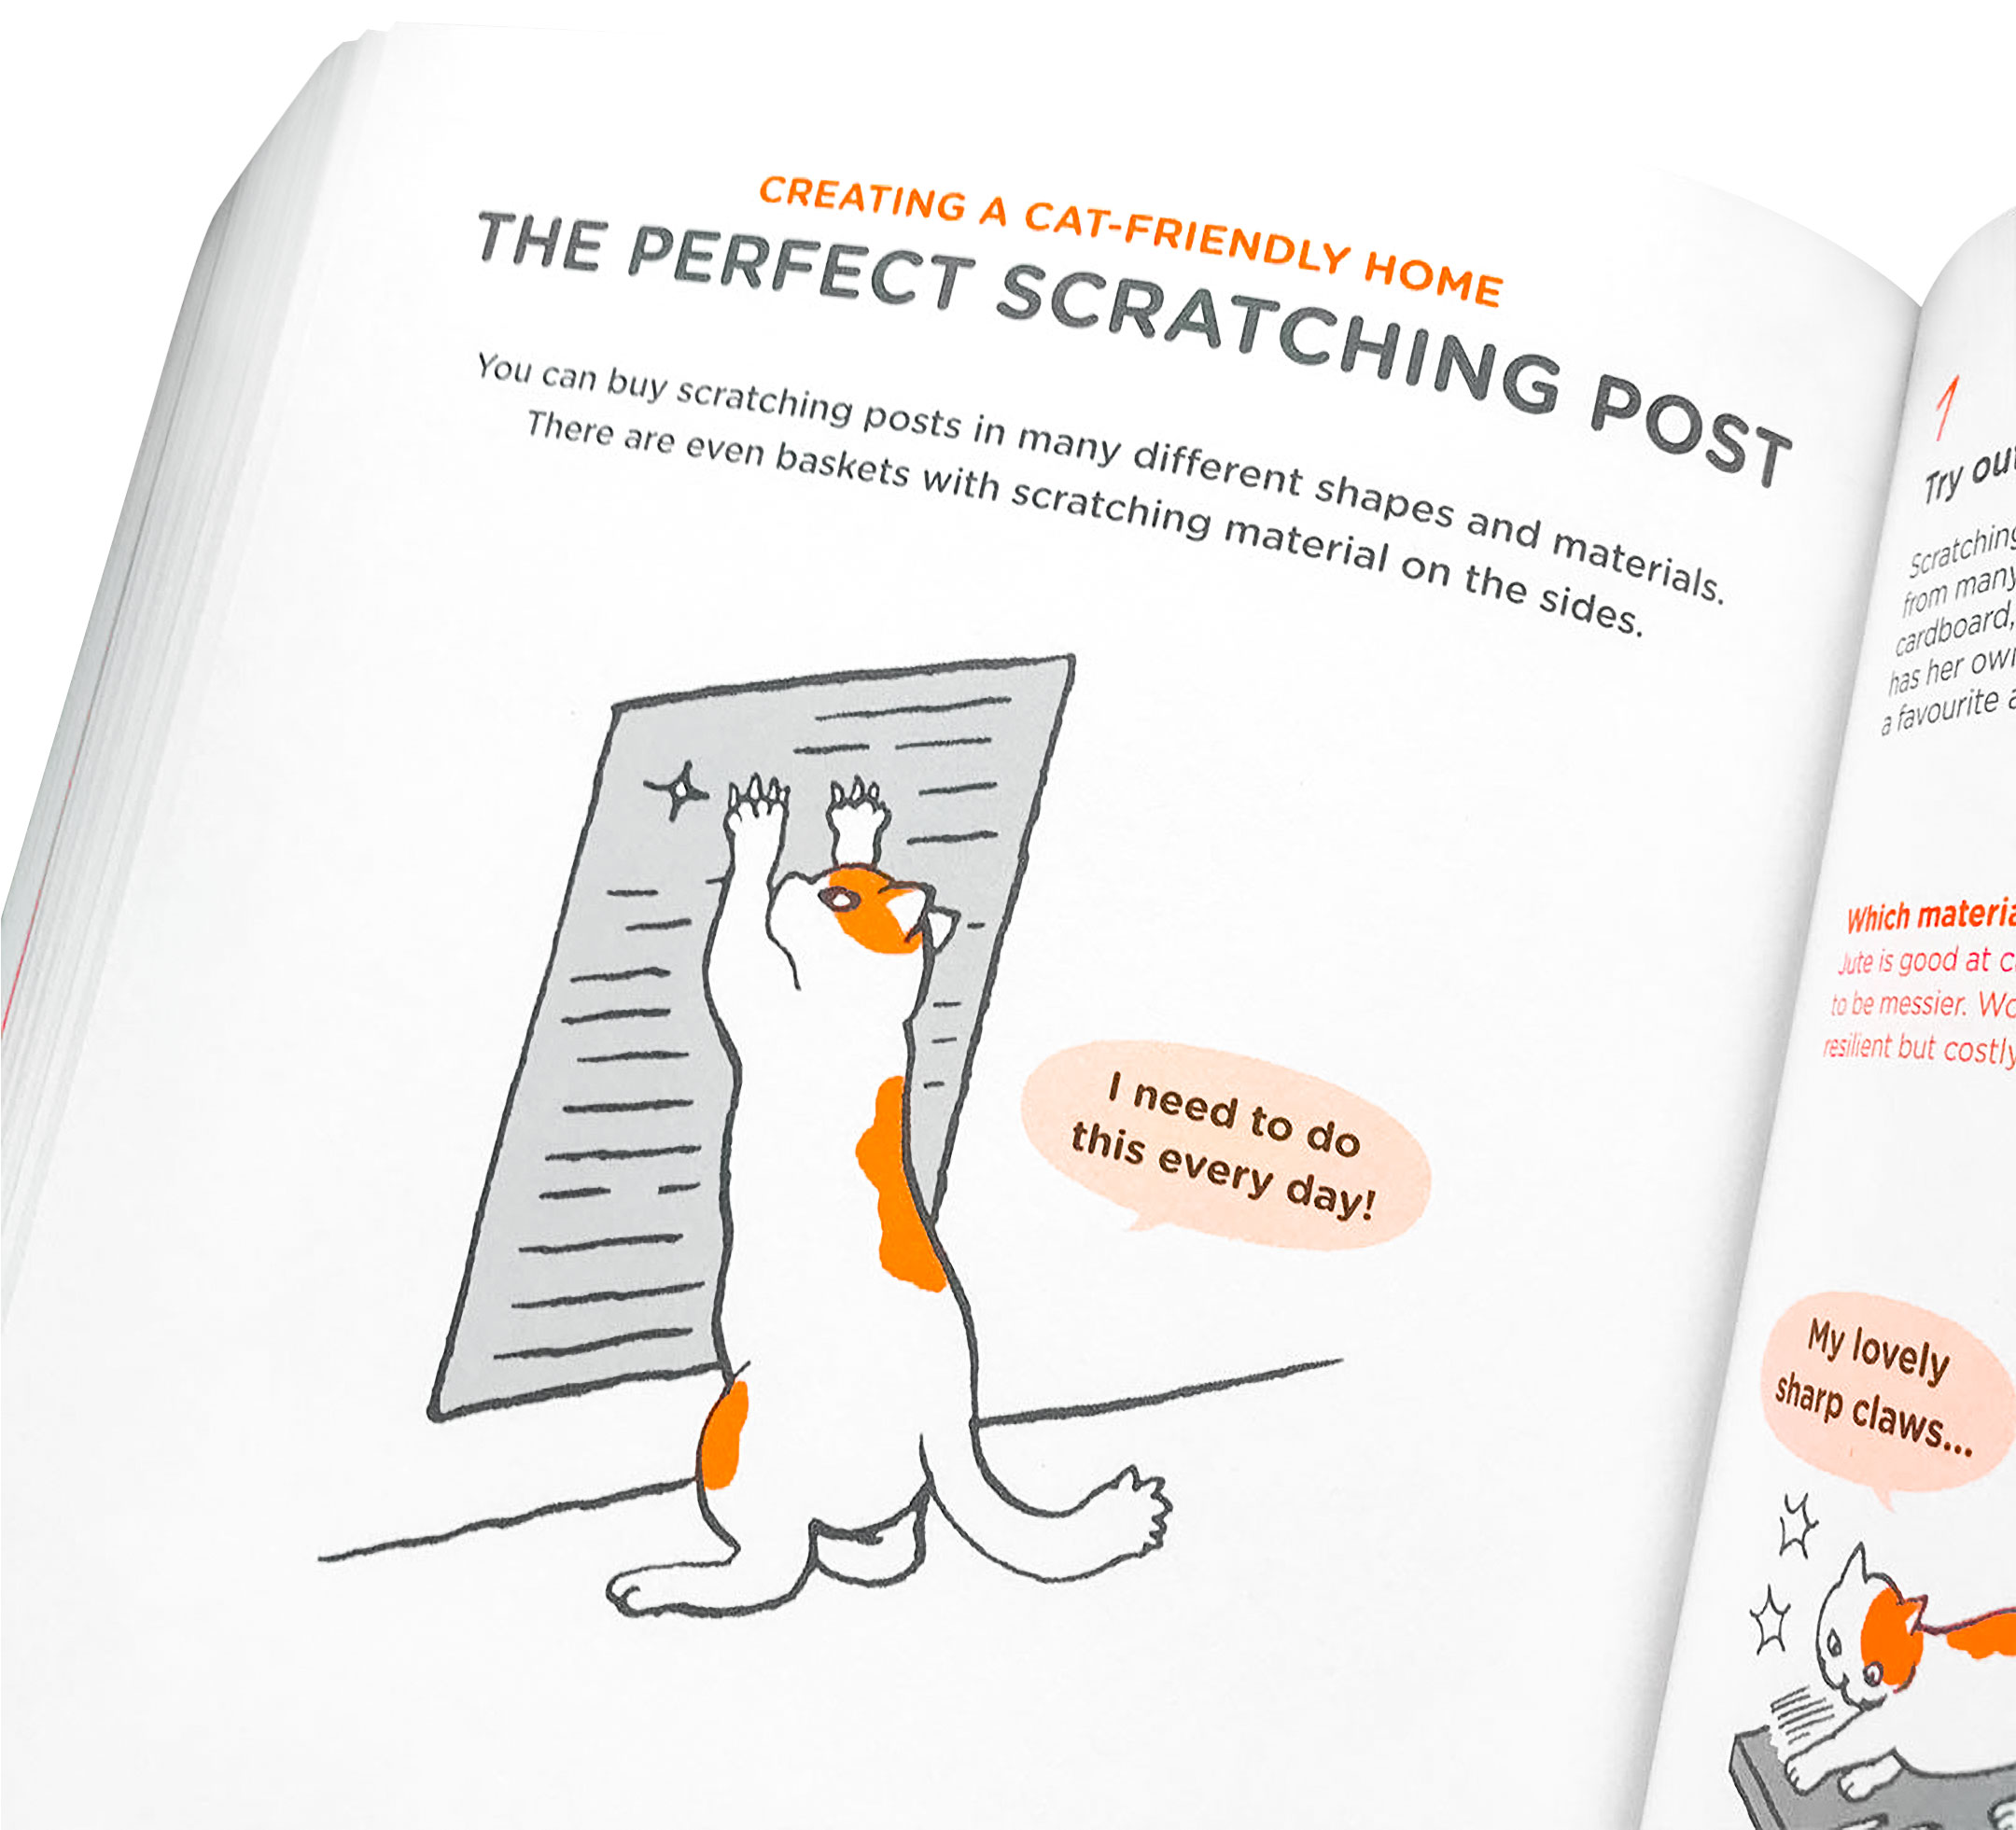 Photograph of the inside of a double page spread from the book, on the left page, it shows a cat scratching up and wall, to sharpen its nails. The cat is dotted with bright fluorescent orange colours